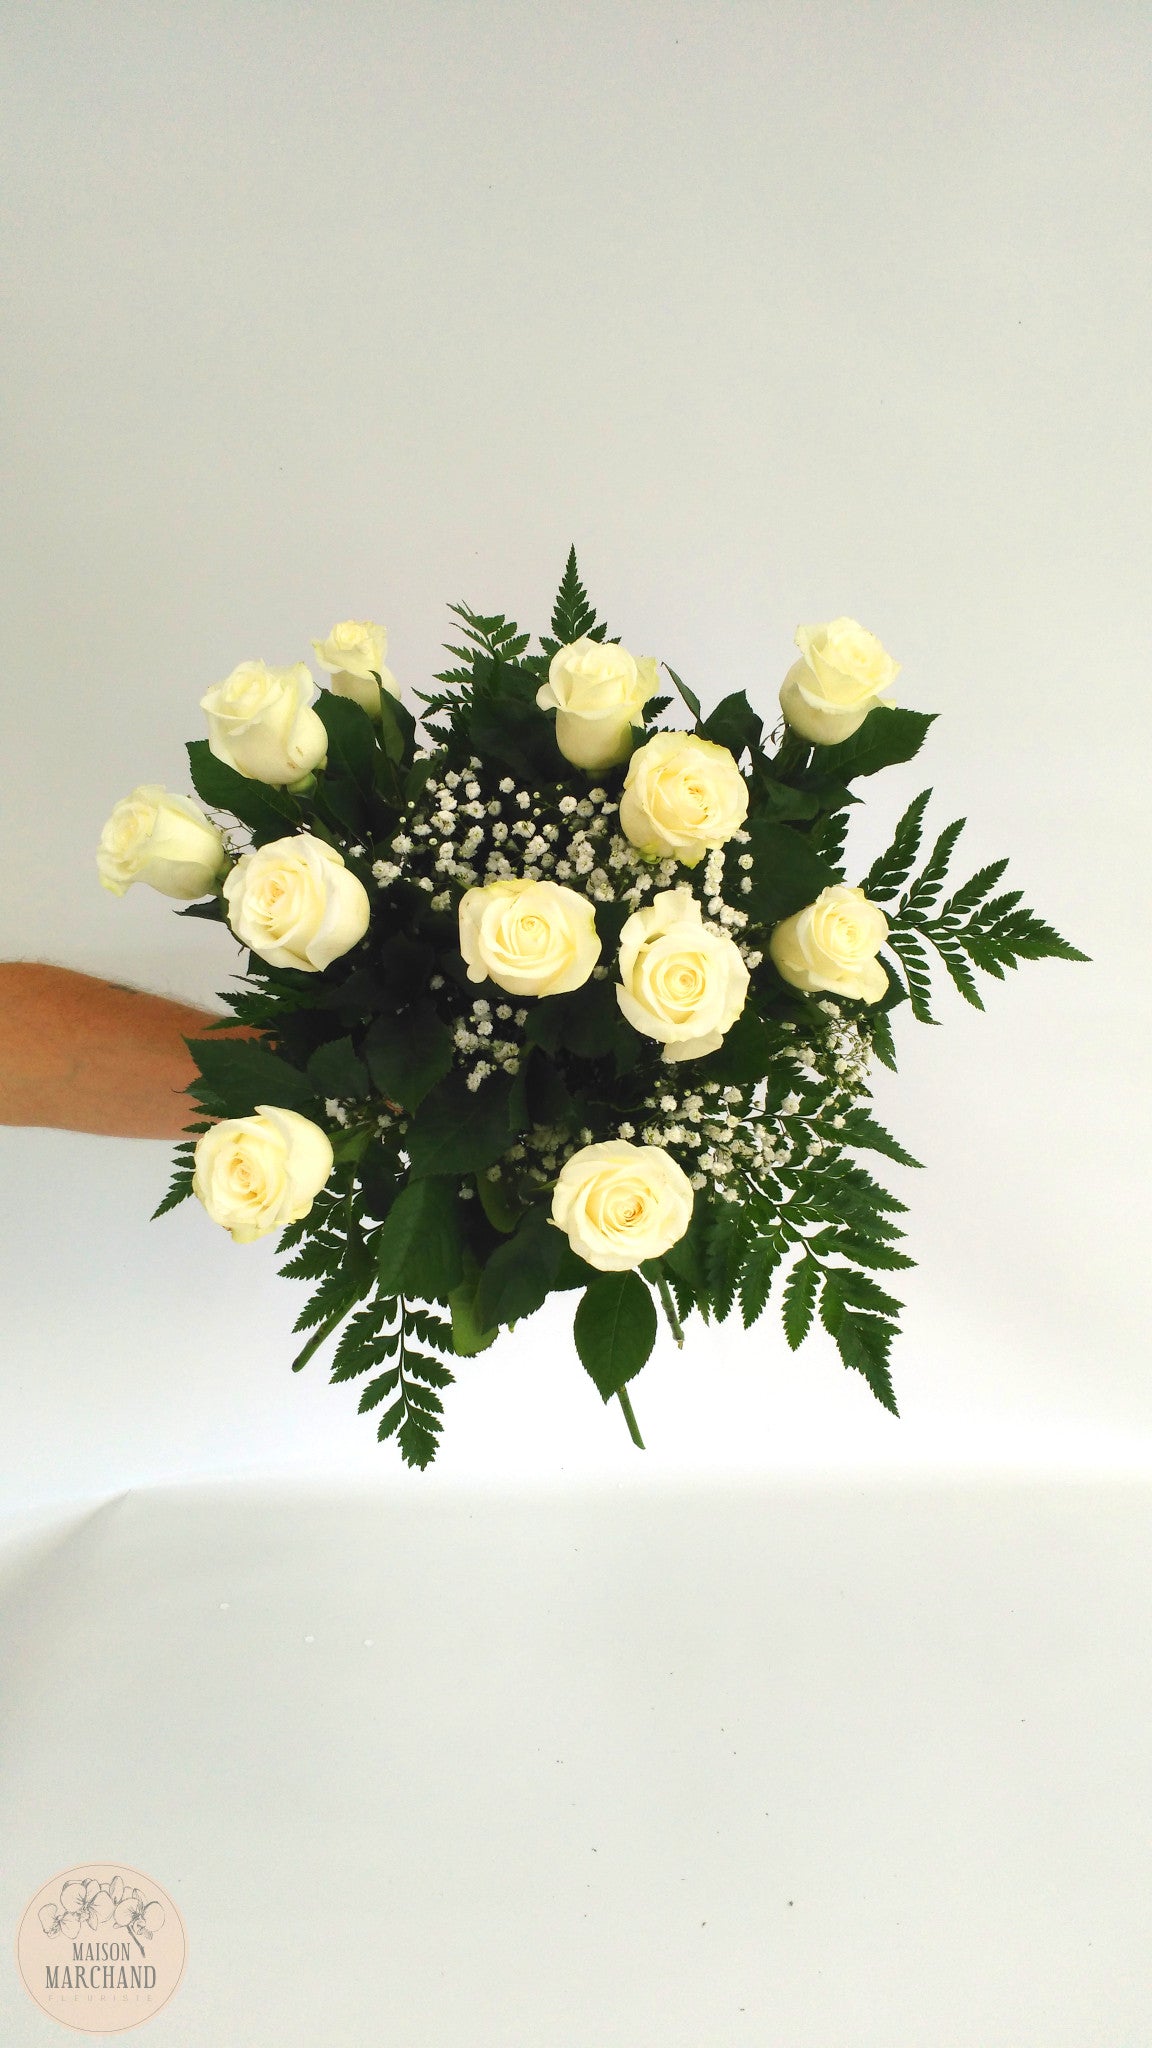 12 Roses Blanches